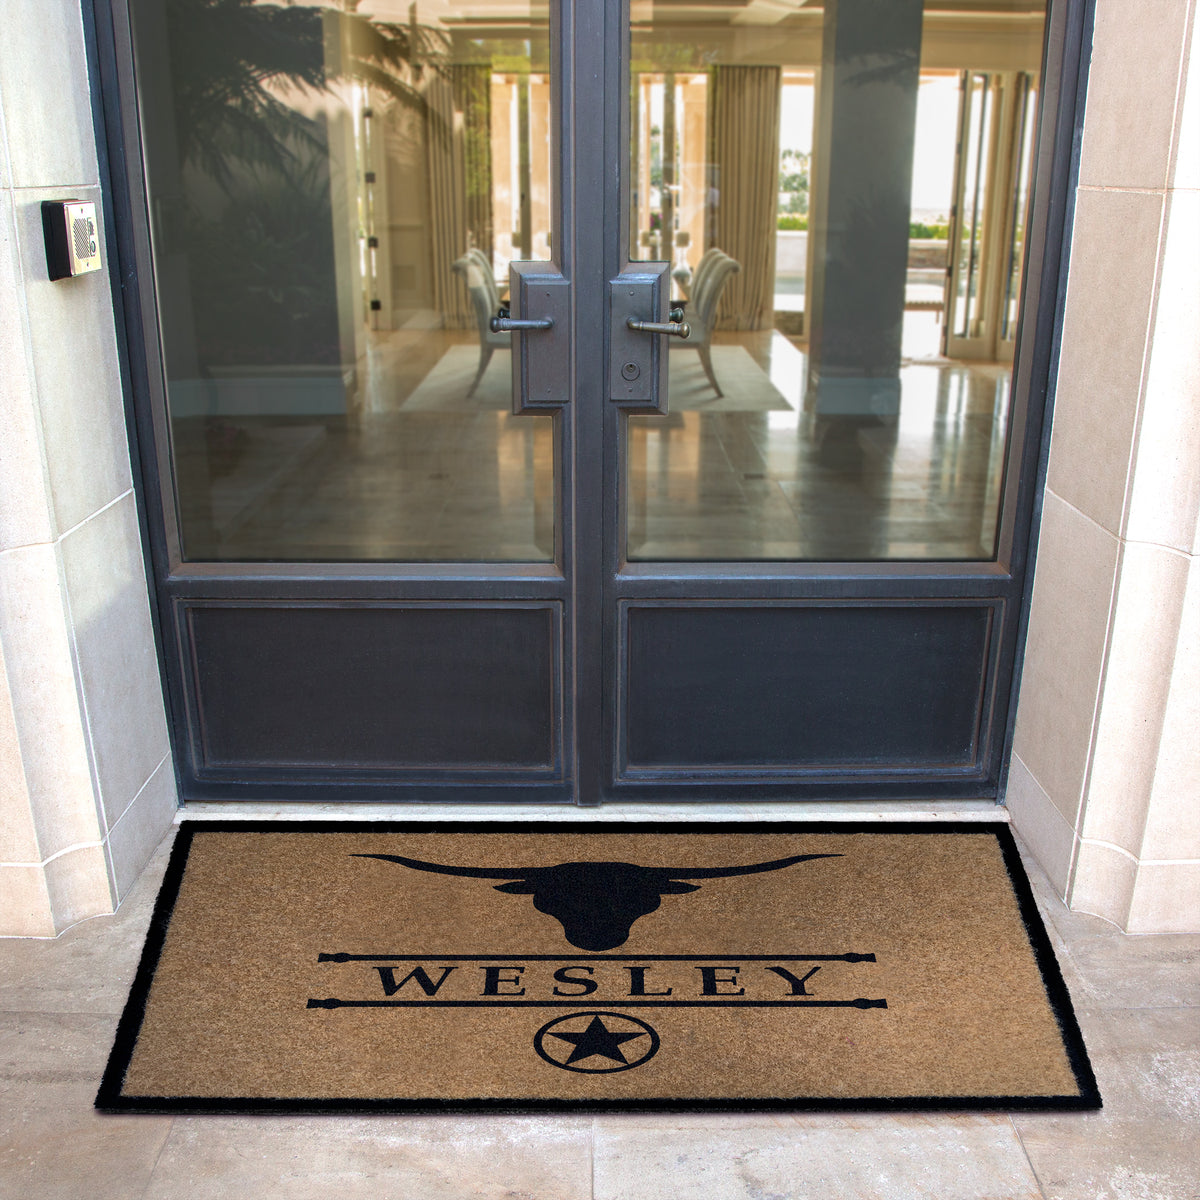 Infinity Custom Mats™ All-Weather Personalized Door Mat - STYLE: WESLEY COLOR:TAN - rugsthatfit.com